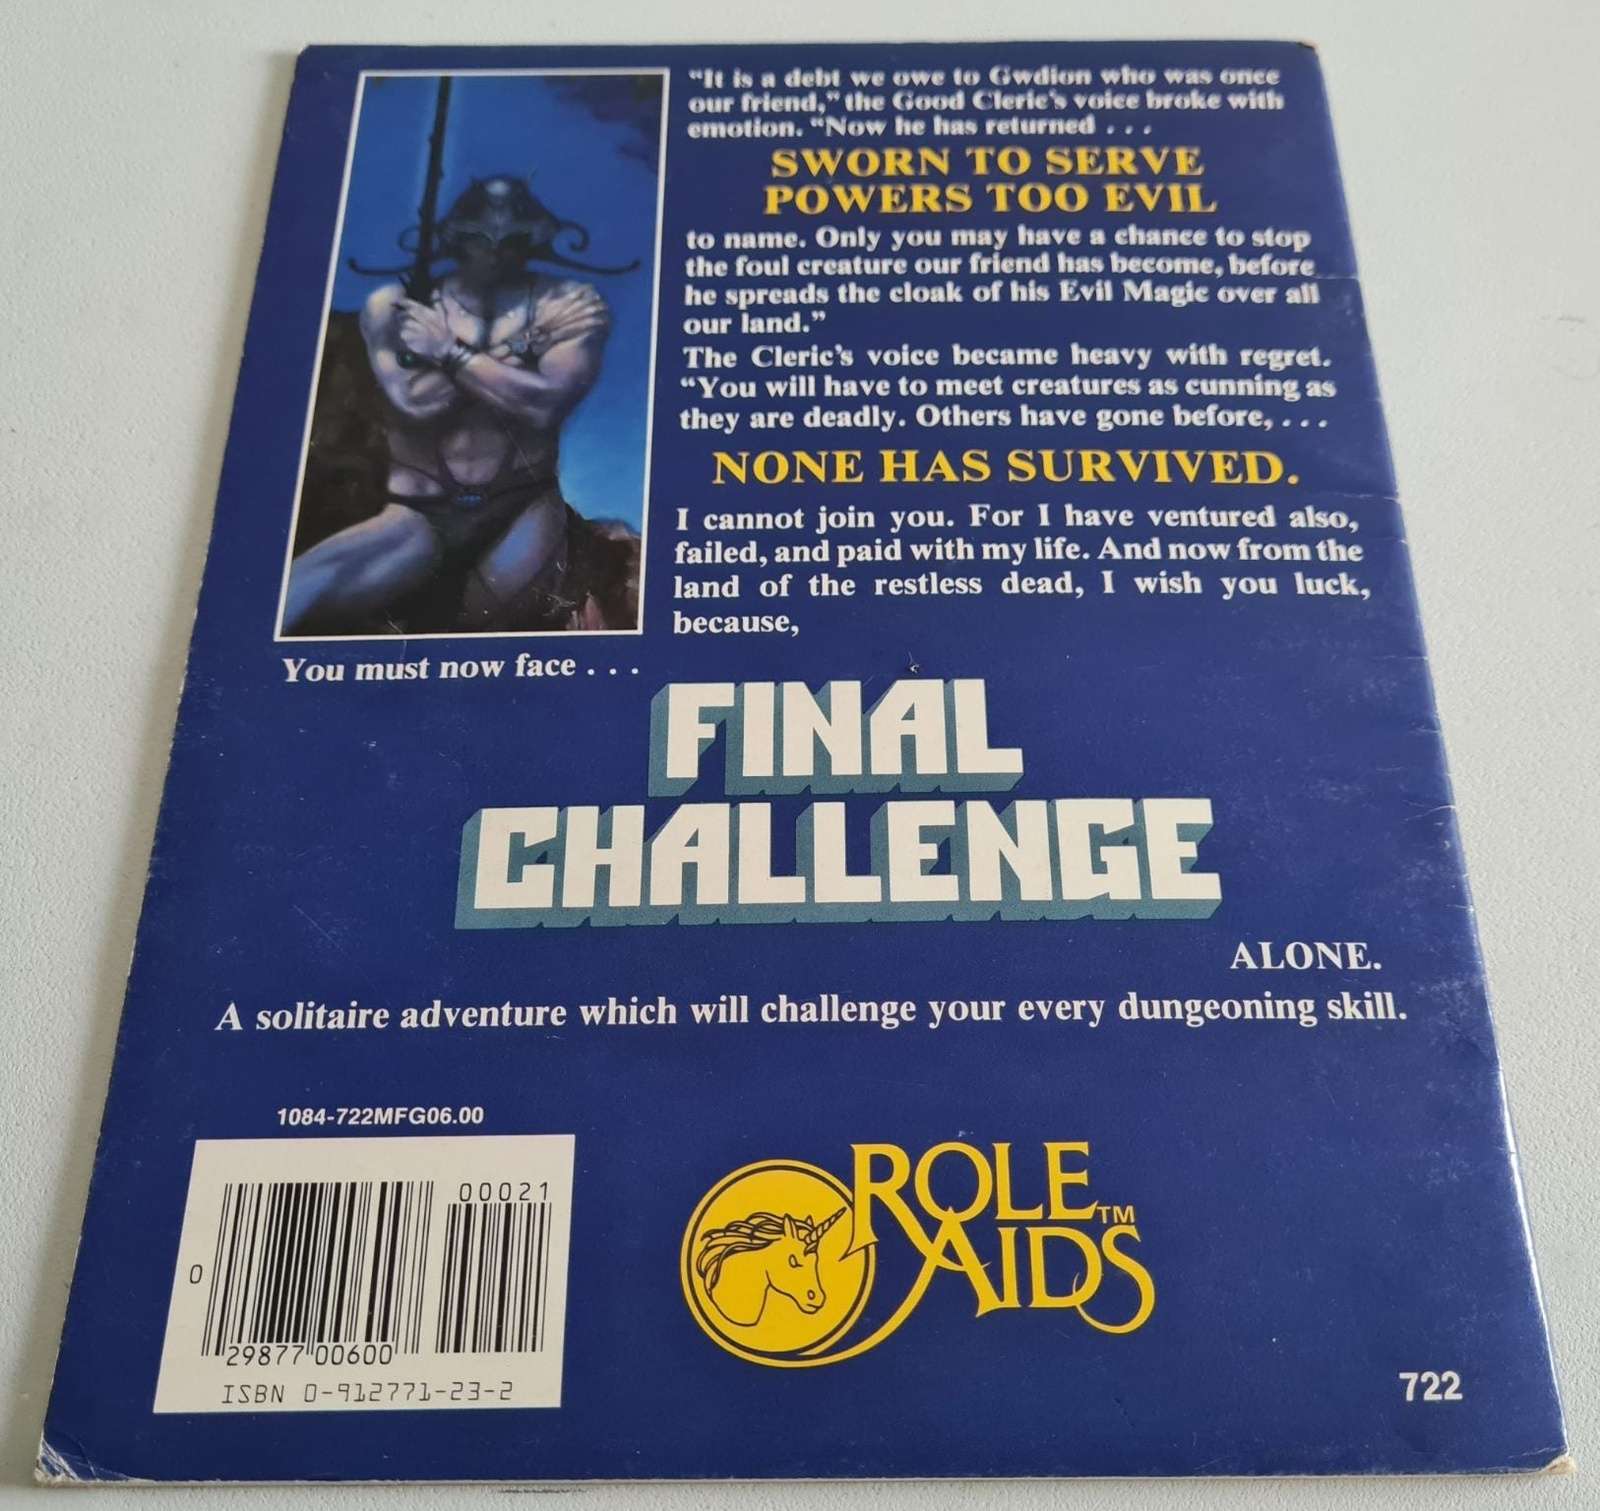 Final Challenge - A Solitaire Module (Role Aids 722) Advanced Dungeons & Dragons